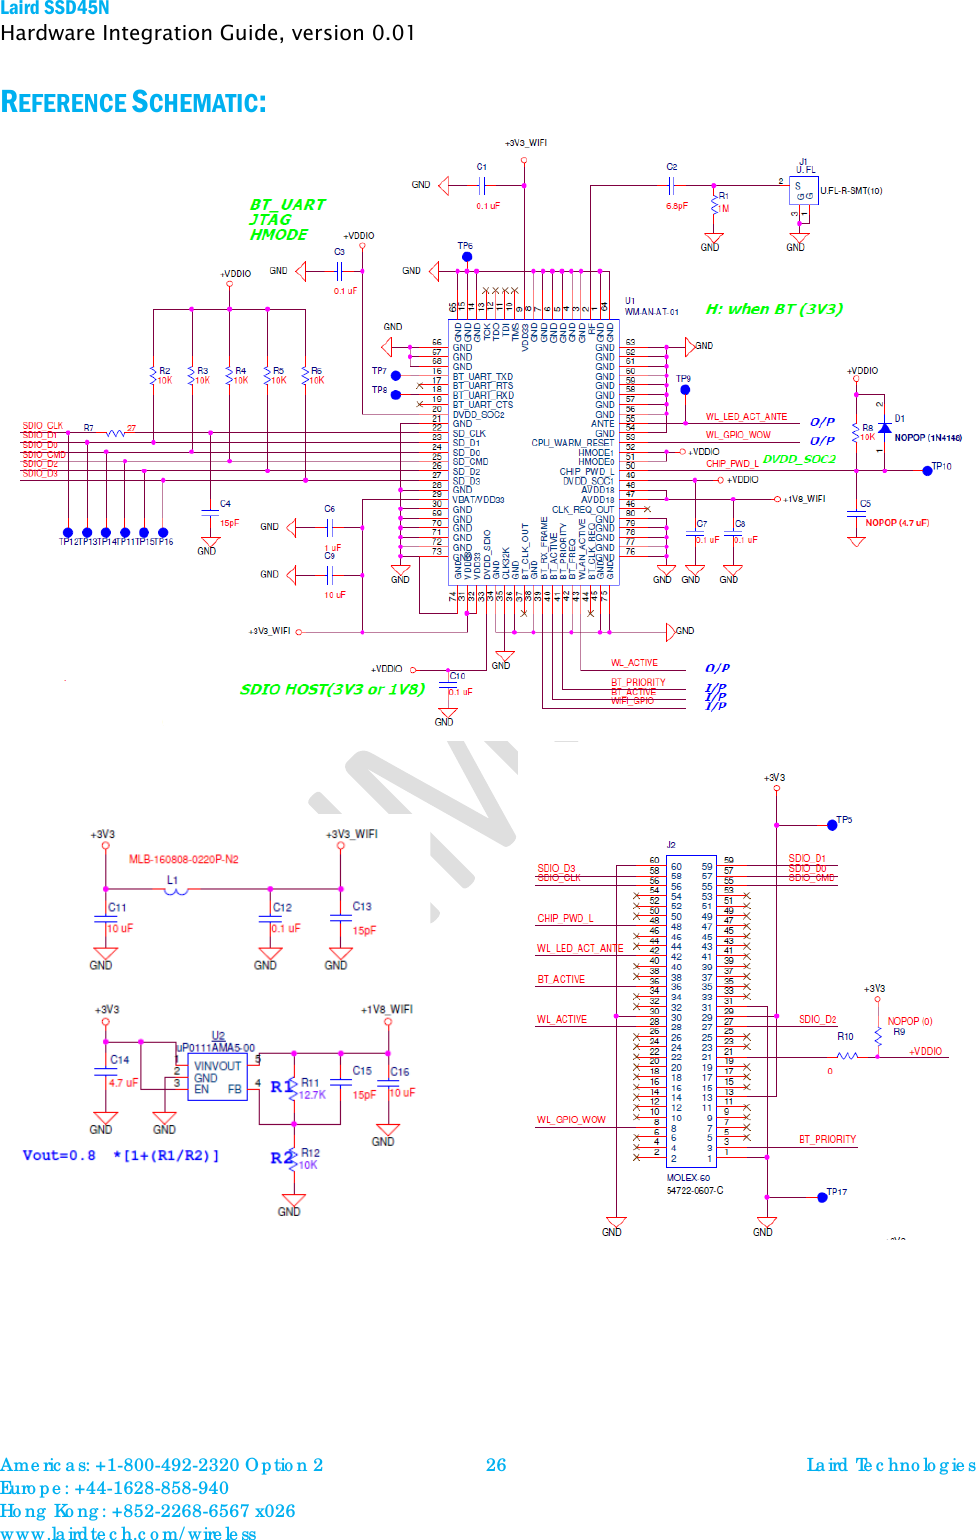 Laird SSD45N Hardware Integration Guide, version 0.01 REFERENCE SCHEMATIC:                     Americas: +1-800-492-2320 Option 2 Europe: +44-1628-858-940 Hong Kong: +852-2268-6567 x026 www.lairdtech.com/wireless 26 Laird Technologies  